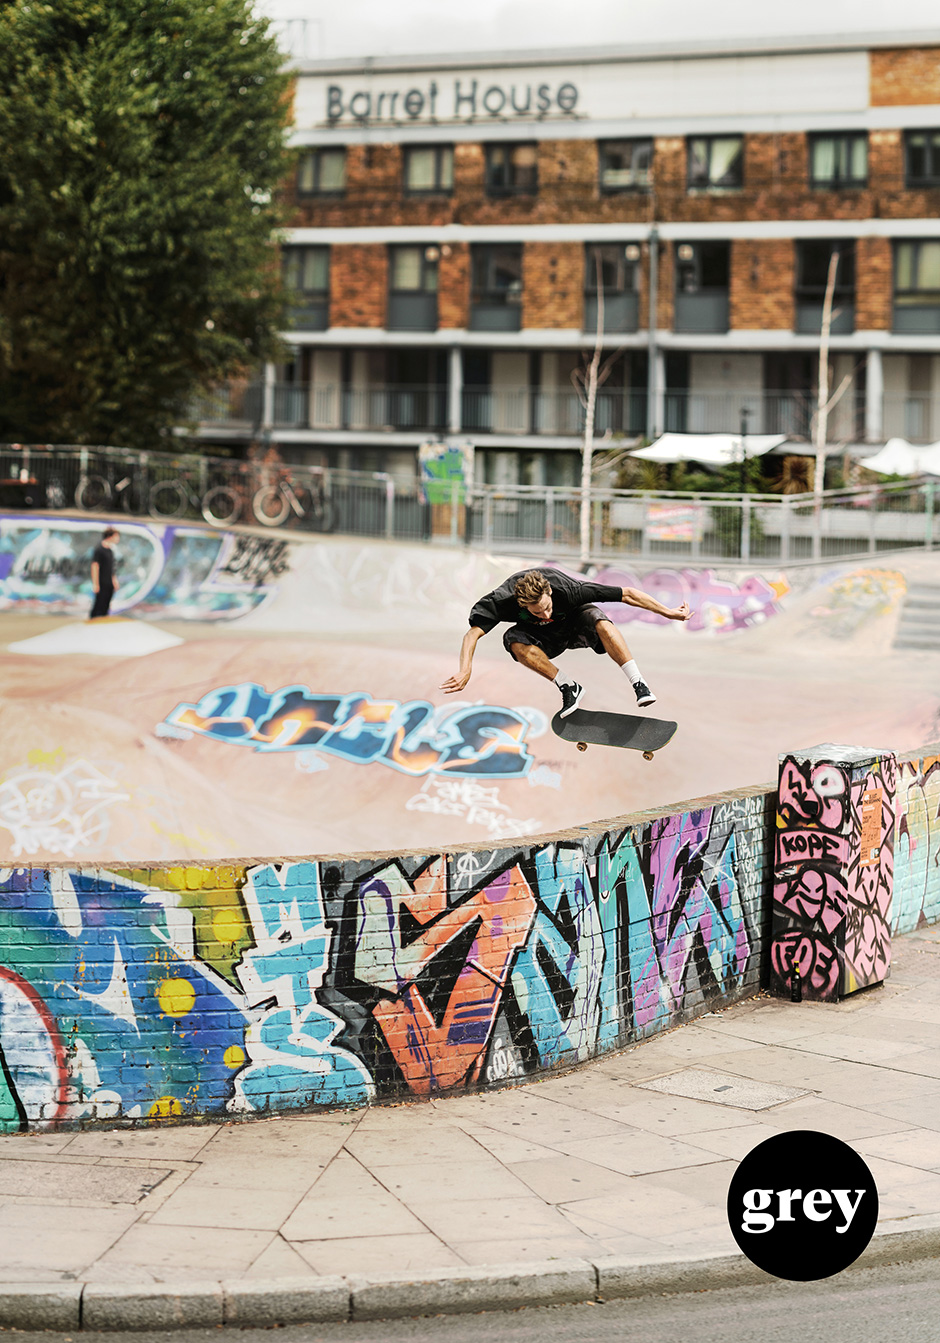 Chris Jones takes immediate advantage of a resurfaced Stockwell to launch this switch flip over the wall. Photo by James Griffith